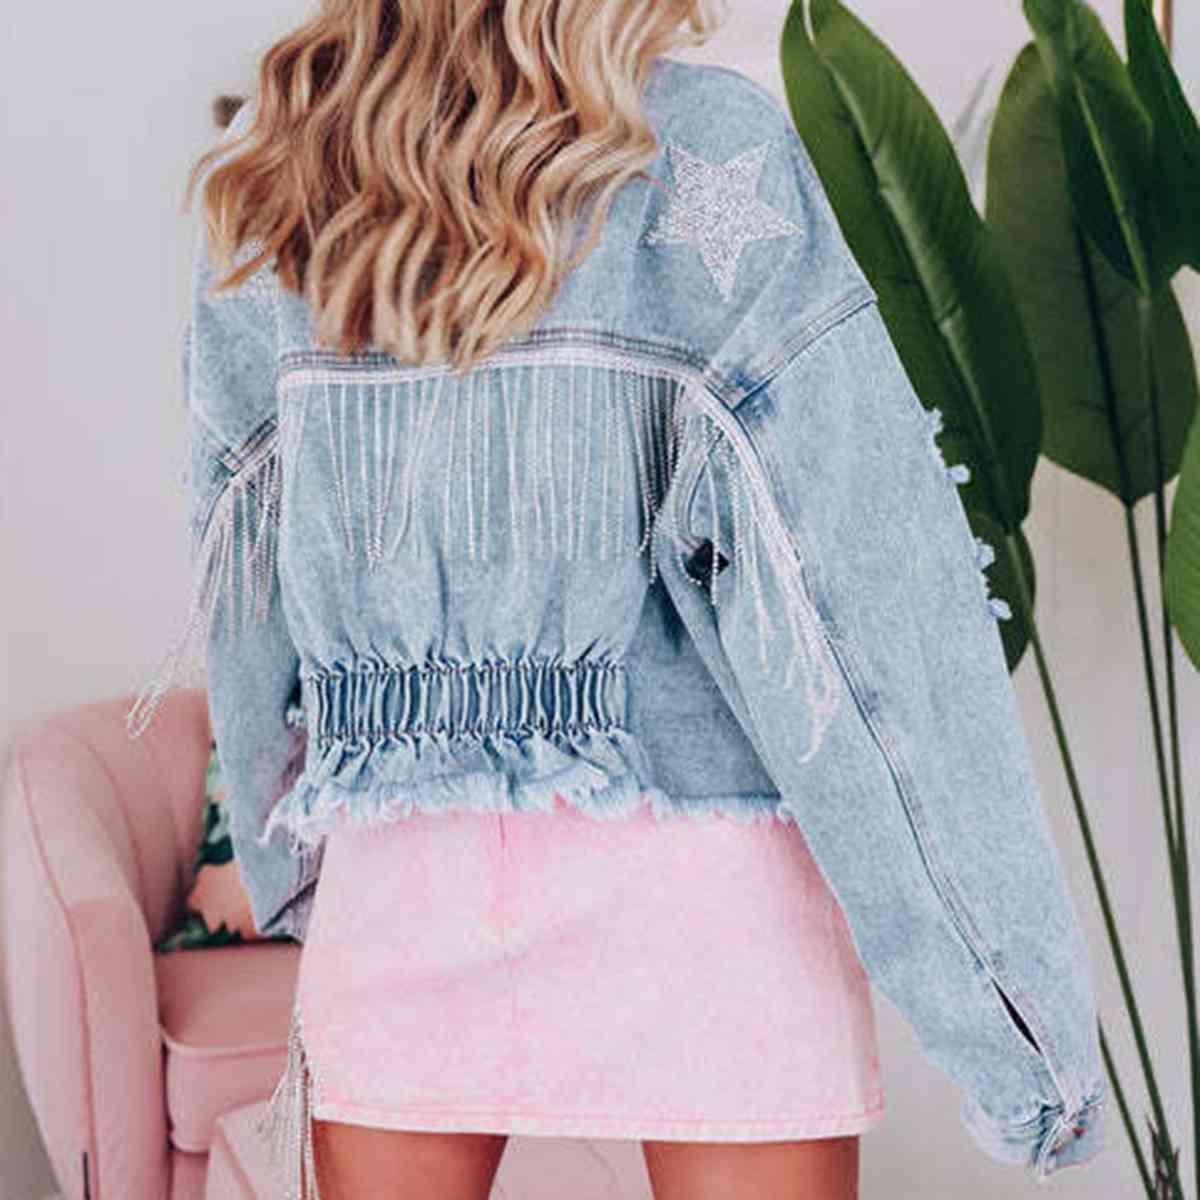 a woman wearing a denim jacket and pink skirt